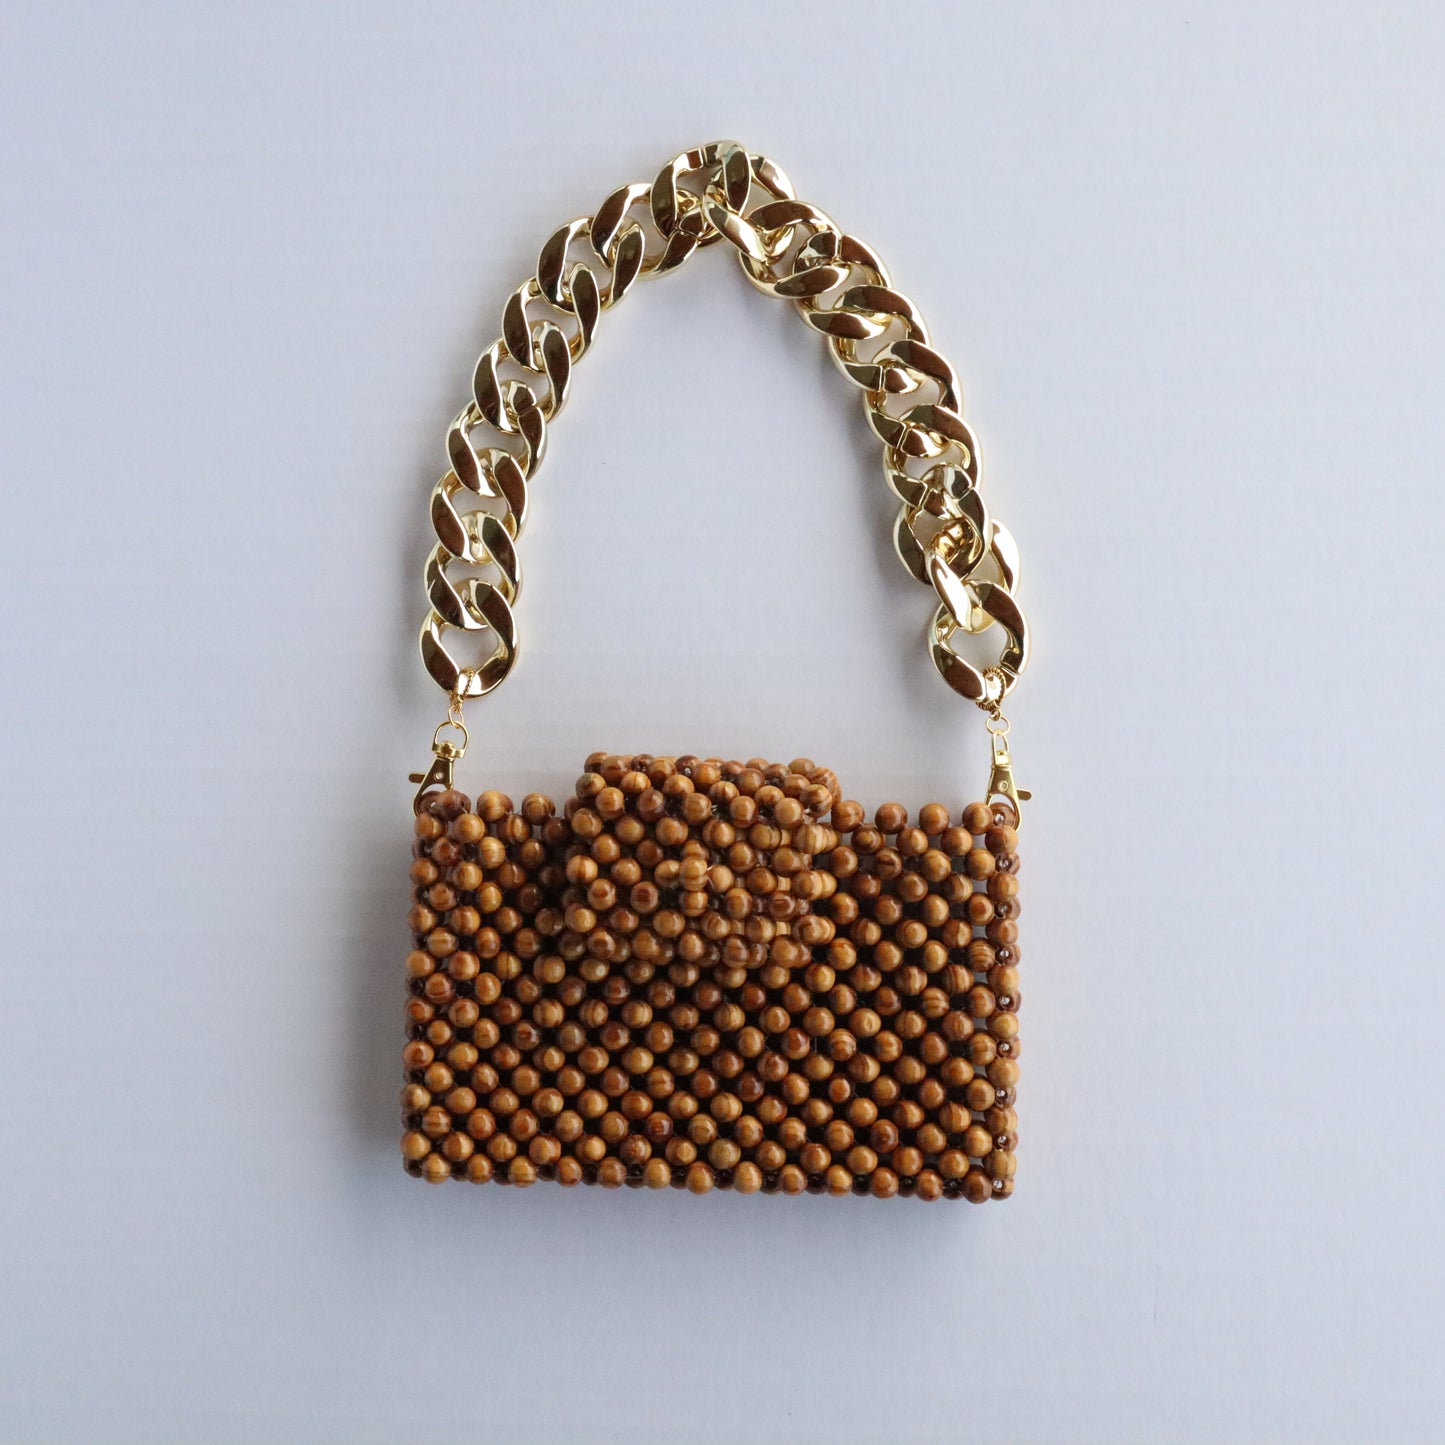 Beaded Purse With Gold Chain Link Strap